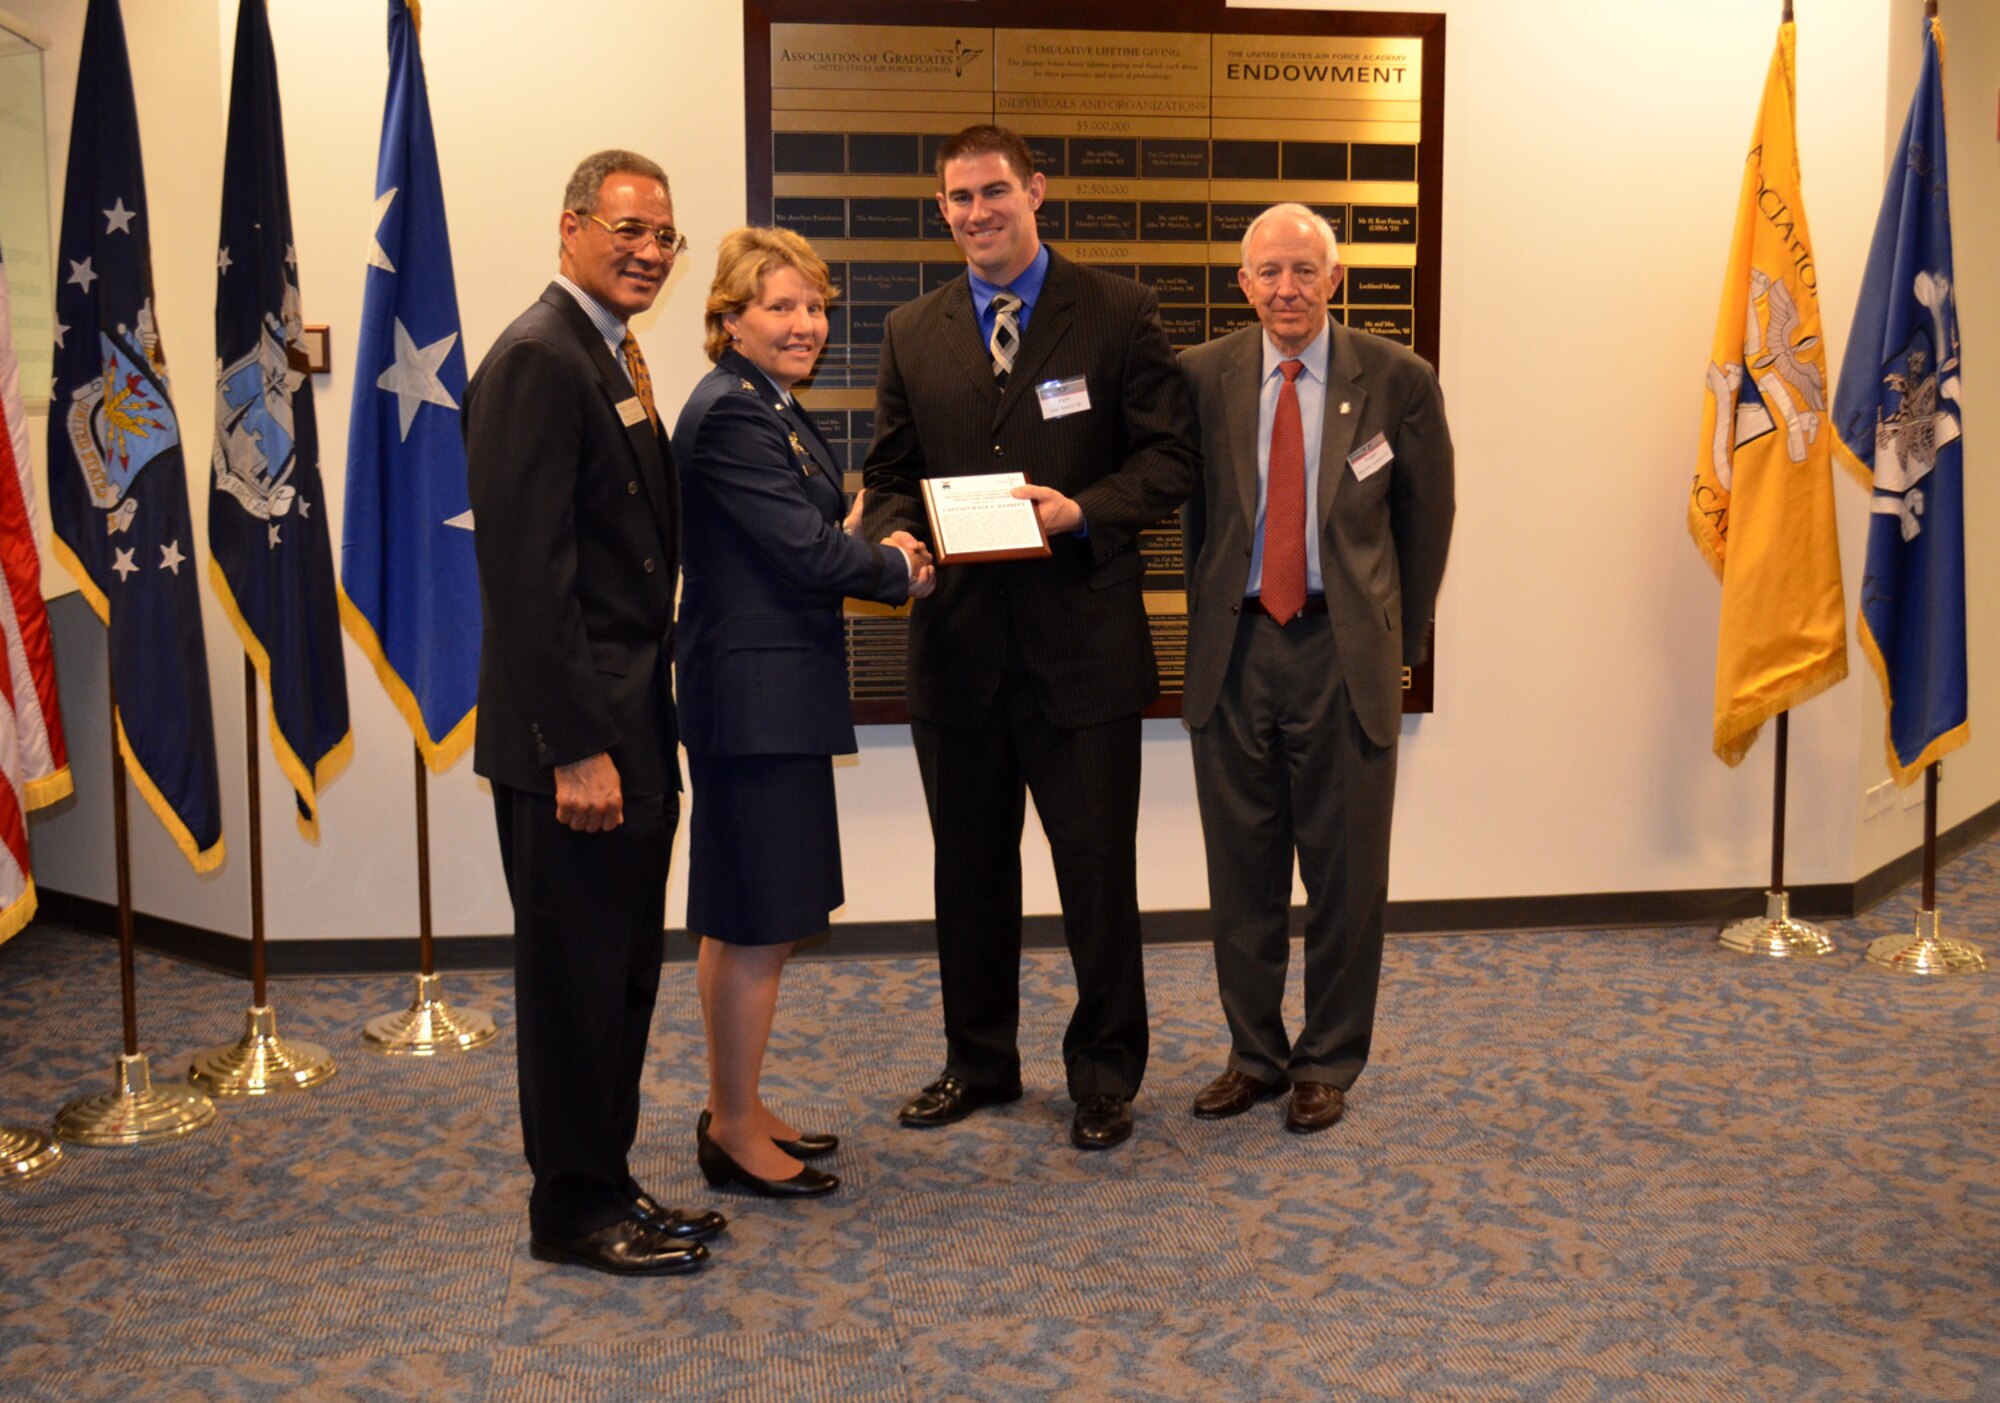 Capt. Kyle Babbit, 303d Fighter Squadron A-10 Thunderbolt II pilot, accepts the Jabara Award for Airmanship from Lt. Gen. Michelle D. Johnson, U.S. Air Force Academy Superintendent May 1. Babbitt earned this award for his hard work and dedication down range between September 2013 and October 2014. (U.S. Air Force photo by Capt. Denise Haeussler)
